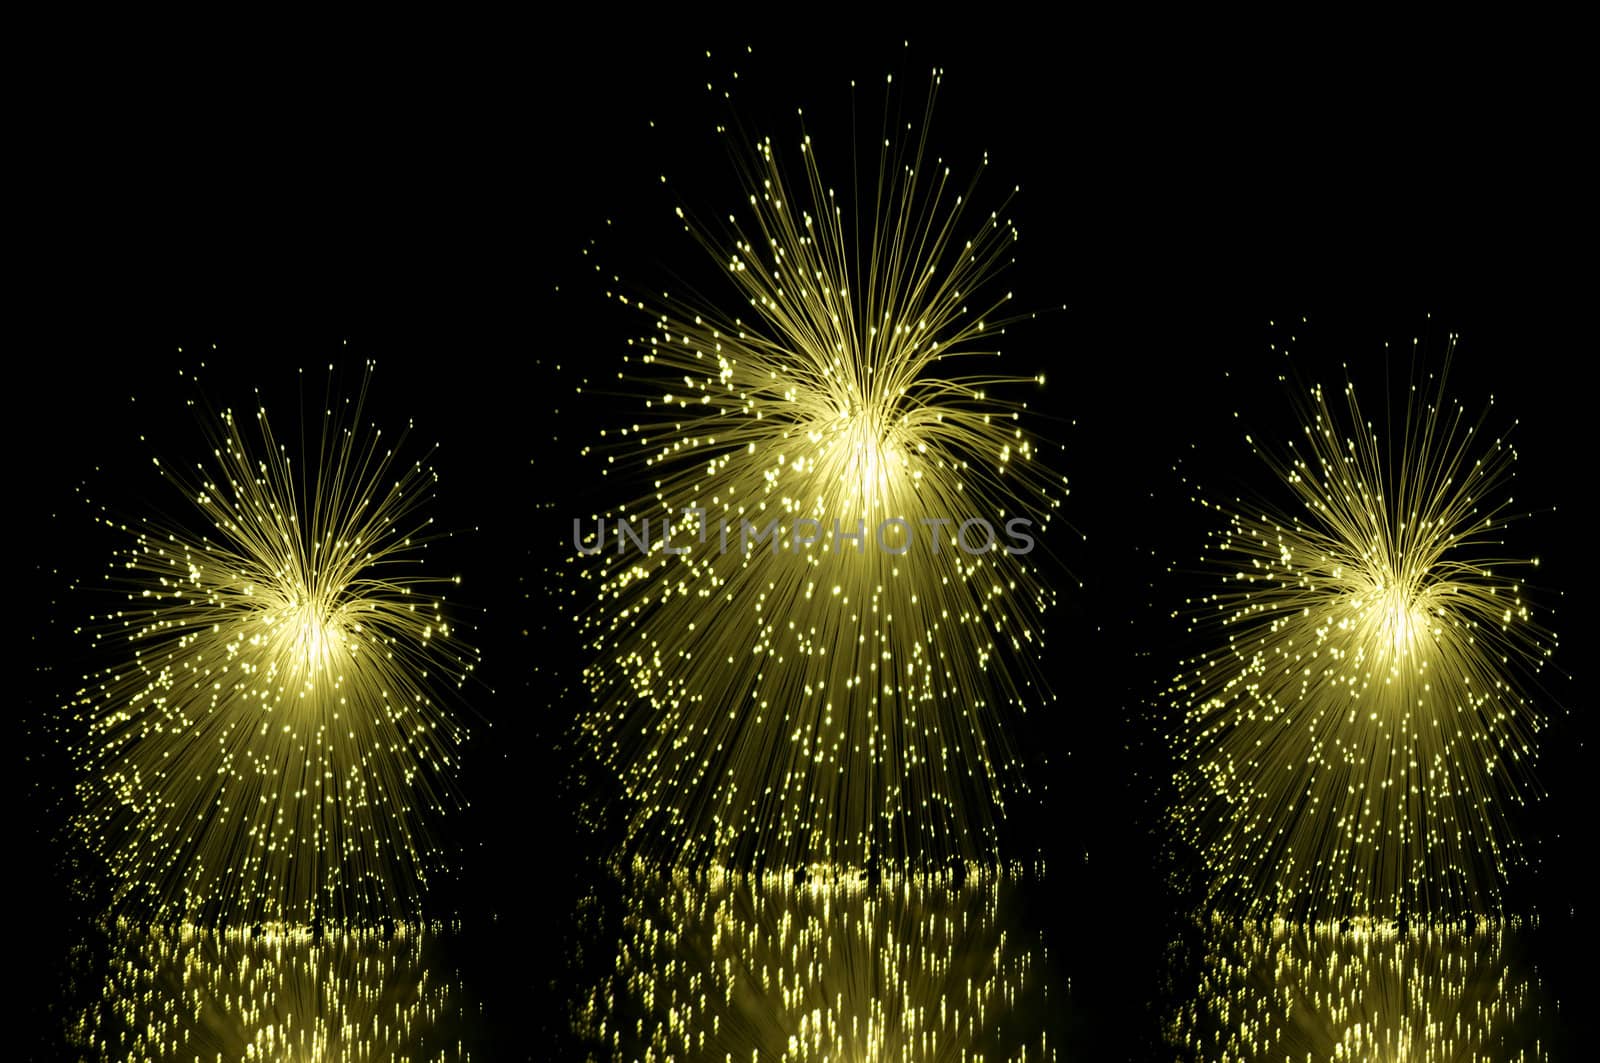 Low level angle capturing three yellow groups of illuminated fibre optic light strands against a black background and reflecting into the foreground.